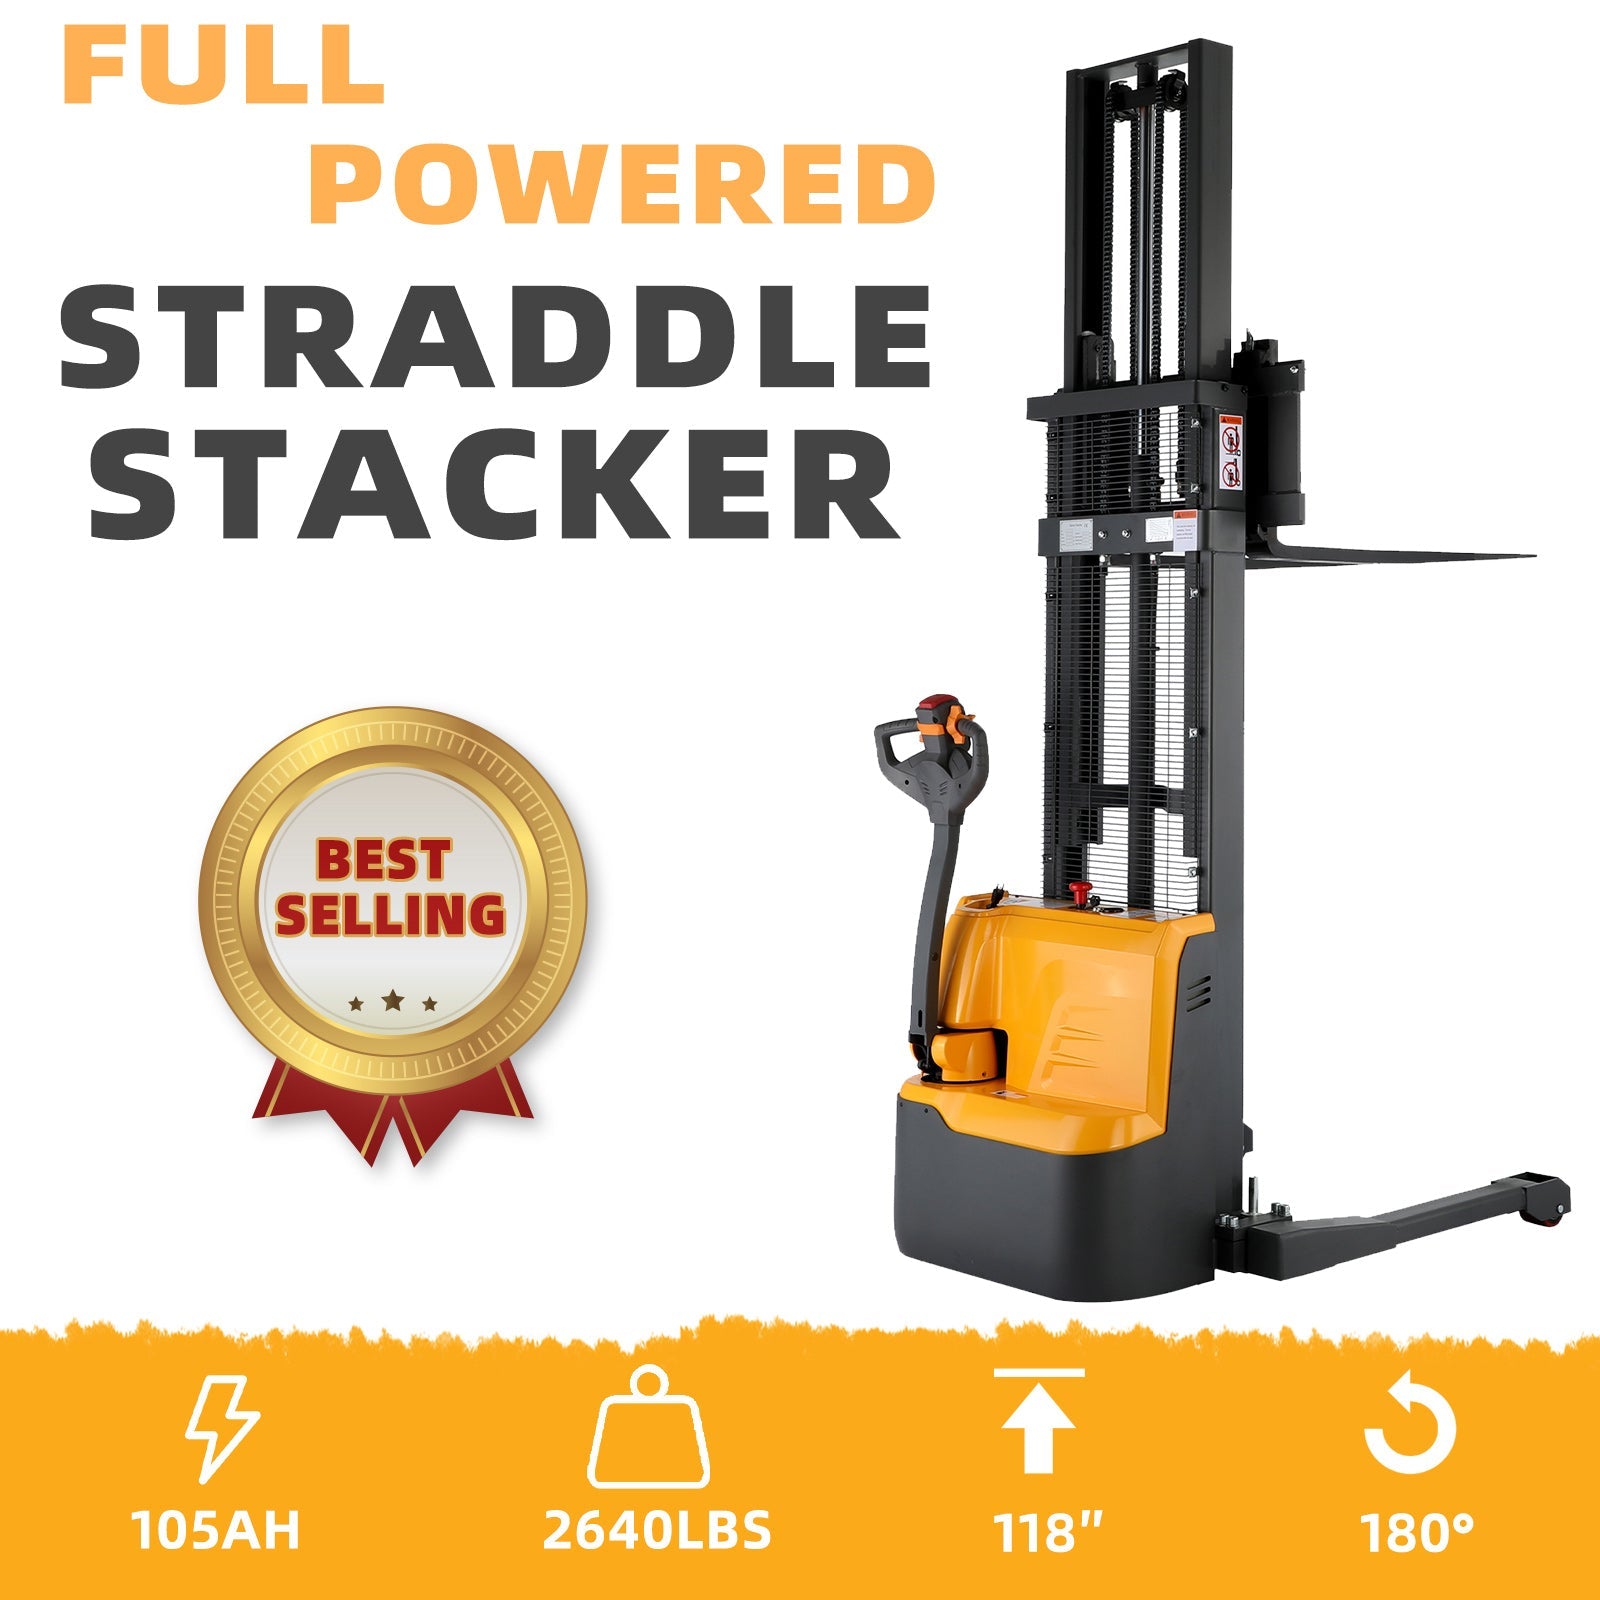 ApolloLift | Powered Forklift Full Electric Walkie Stacker 2200lbs Cap. Straddle Legs. 118" Lifting A-3019